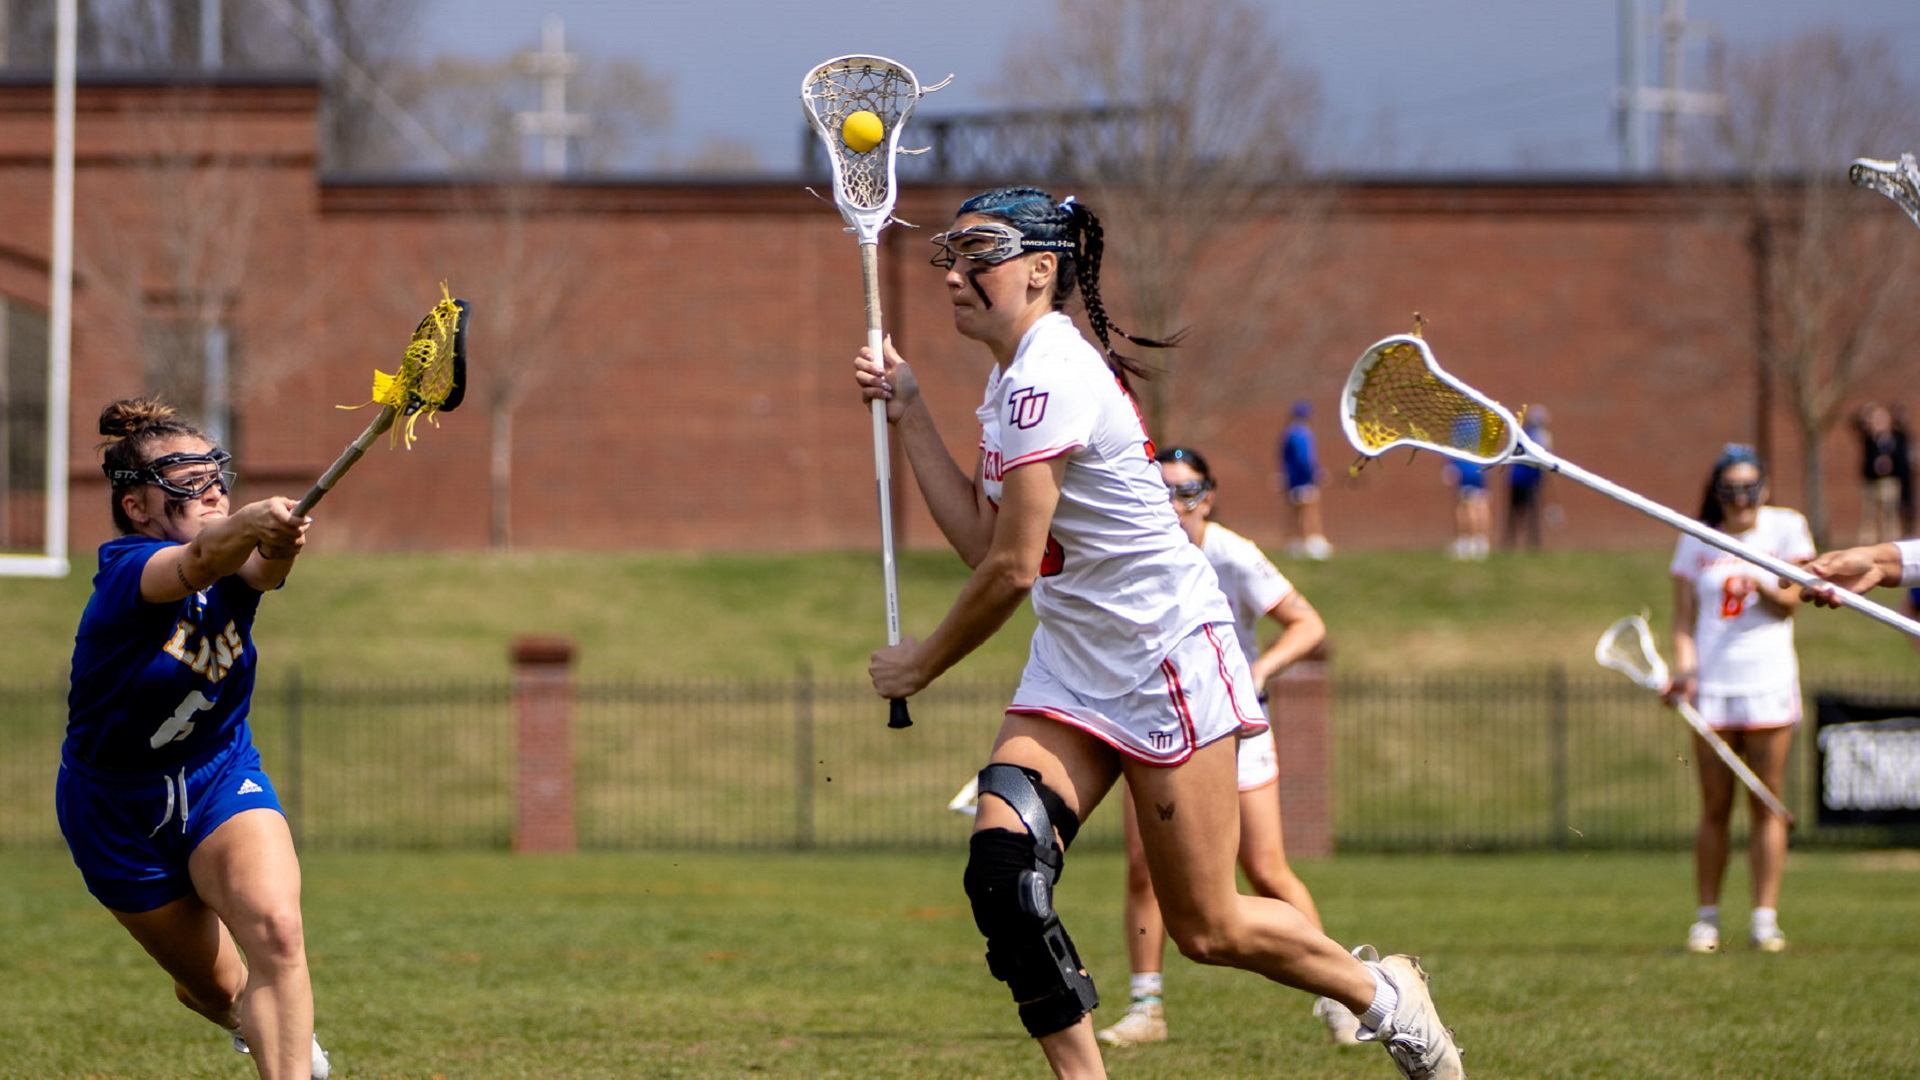 Kylie Marek finished with three goals for the Pioneers in the win over Mars Hill (photo by Kari Ham)